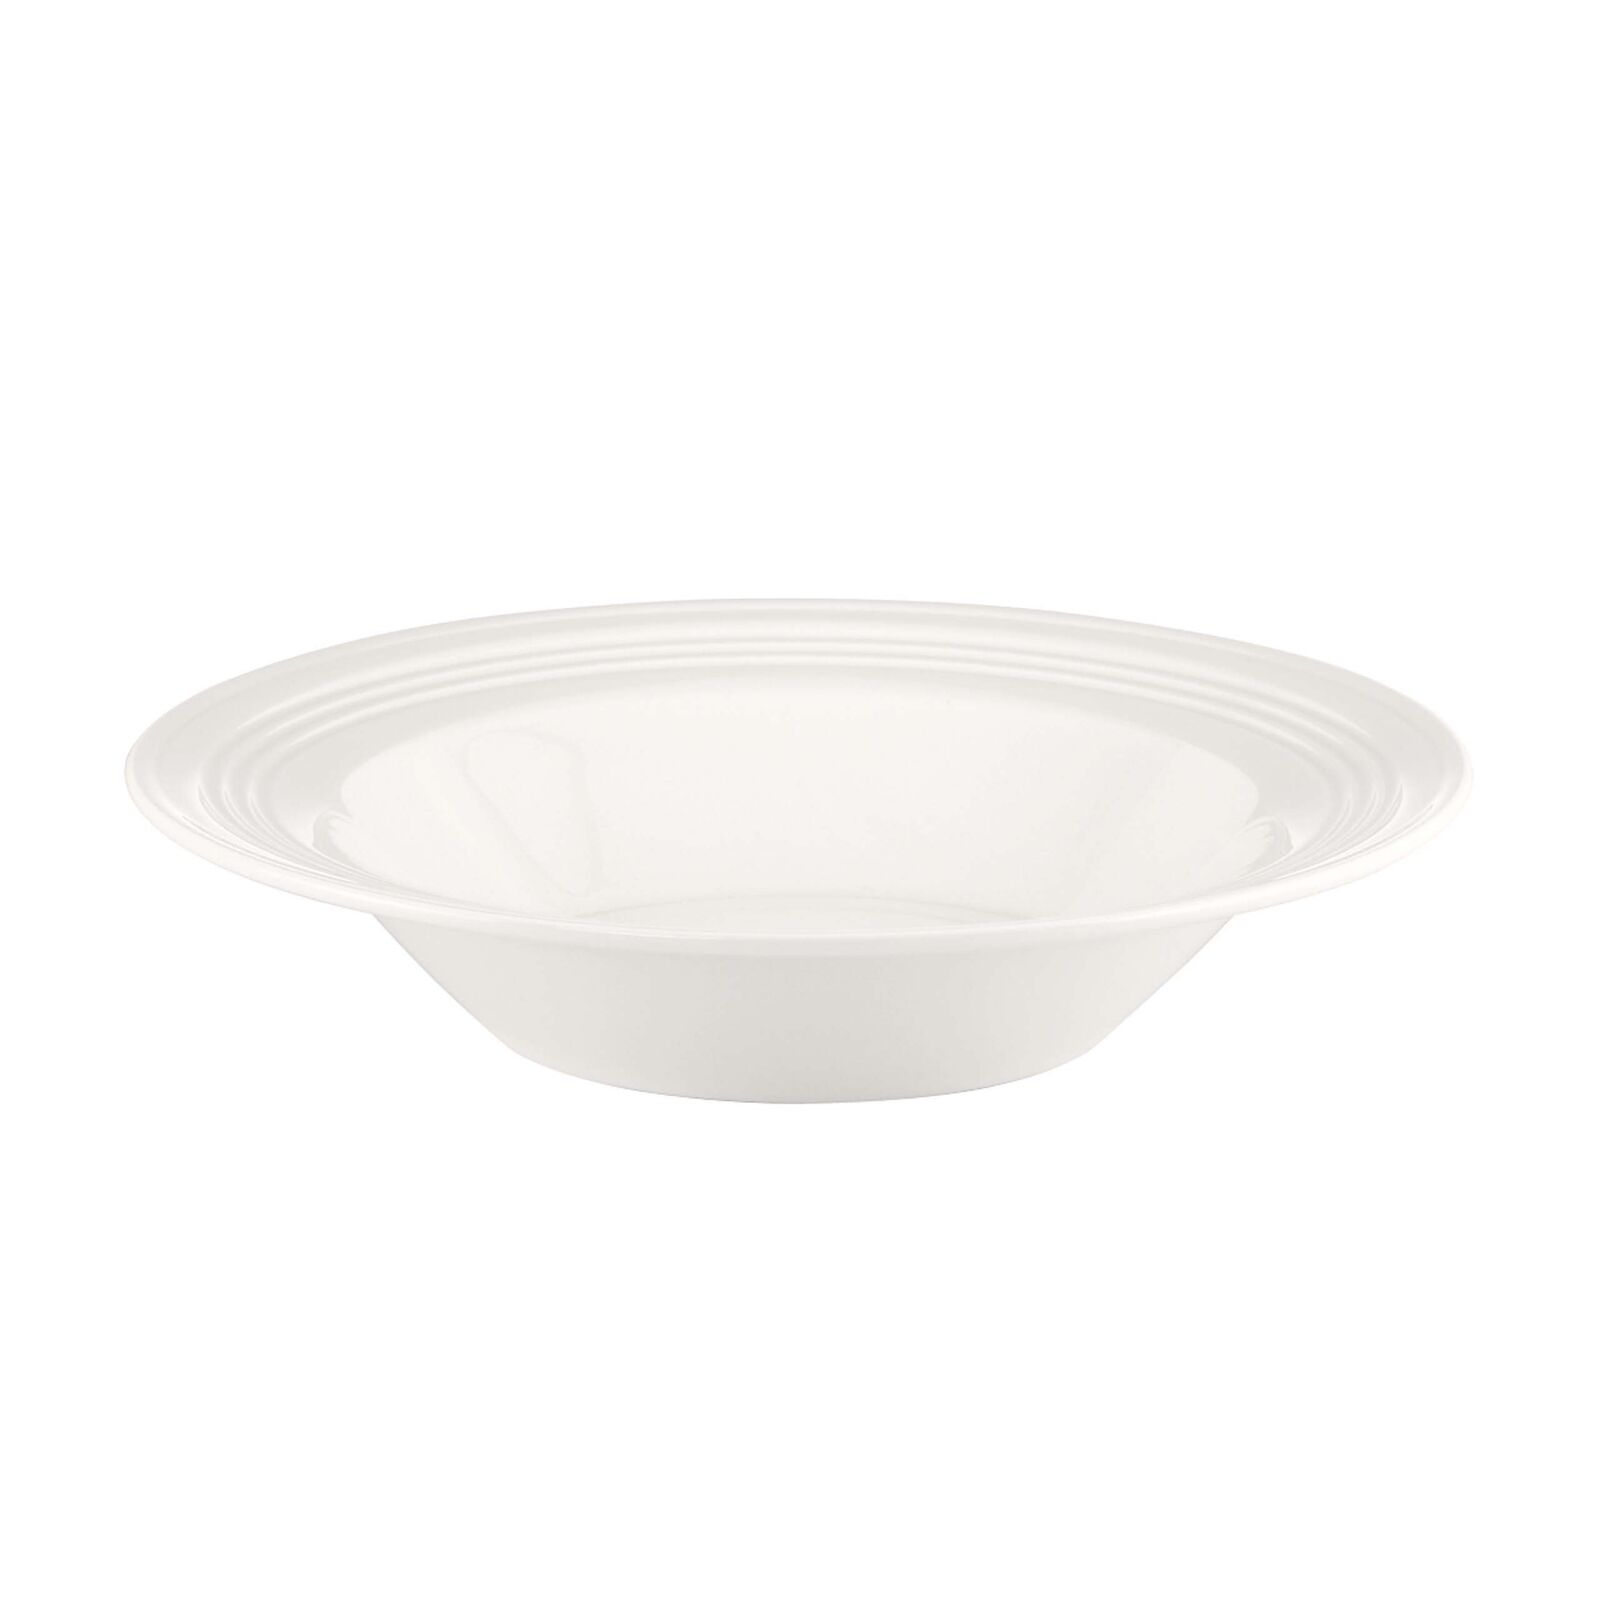 Tin Can Alley Rimmed Bowl,White